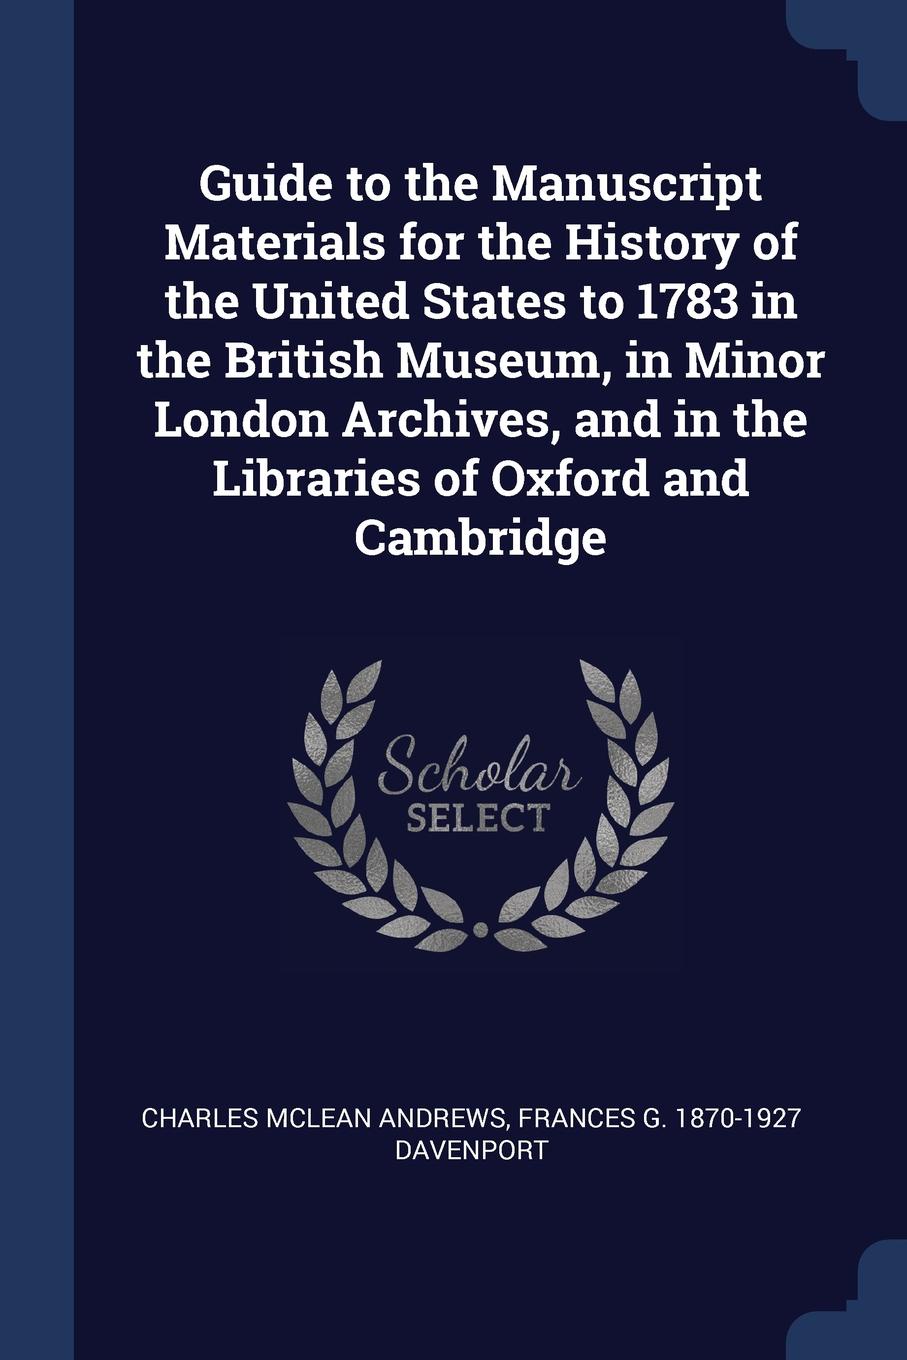 Guide to the Manuscript Materials for the History of the United States to 1783 in the British Museum, in Minor London Archives, and in the Libraries of Oxford and Cambridge